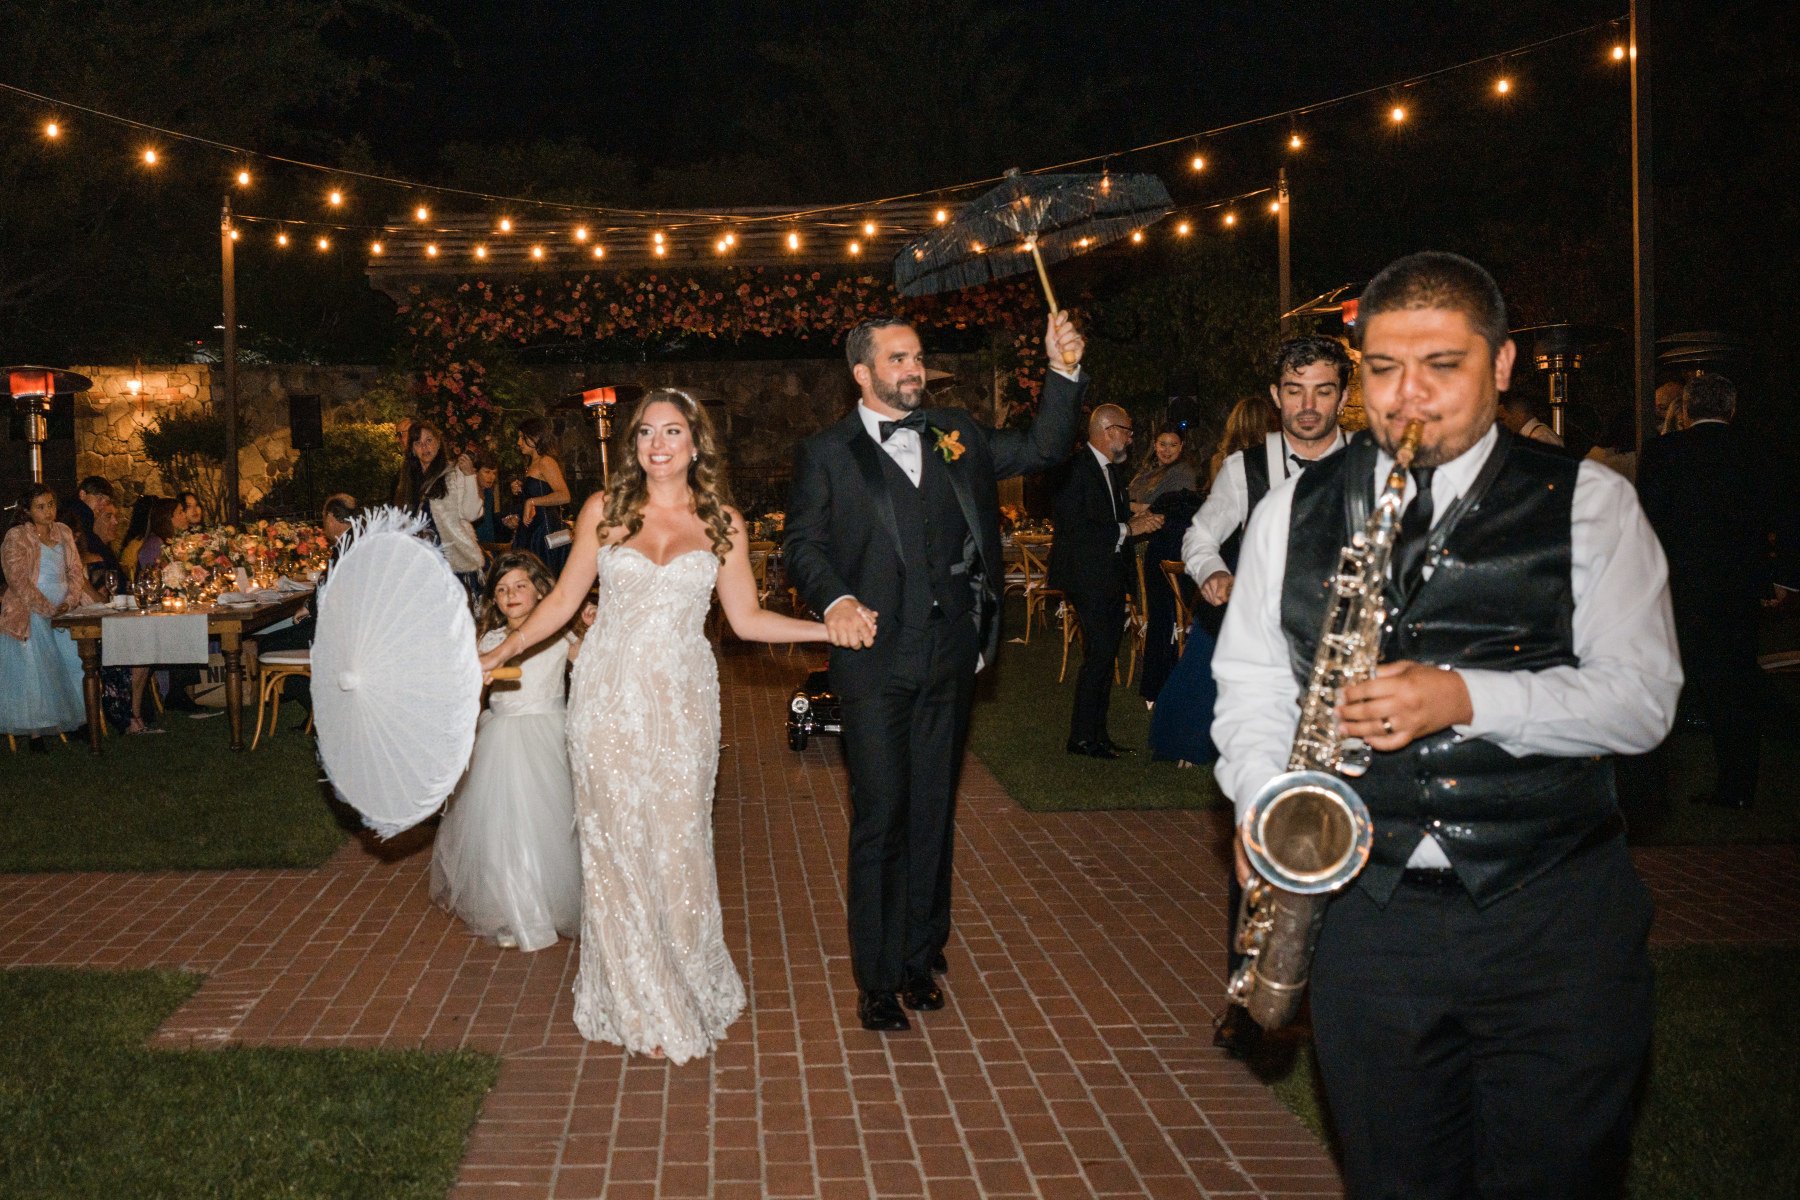 A celebration at the Yountville Wedding Venue shows a bride and groom celebrating New Orleans style with a band playing a saxophone. ,Wedding planned by Blissful Events. Photo by Lily Rose.